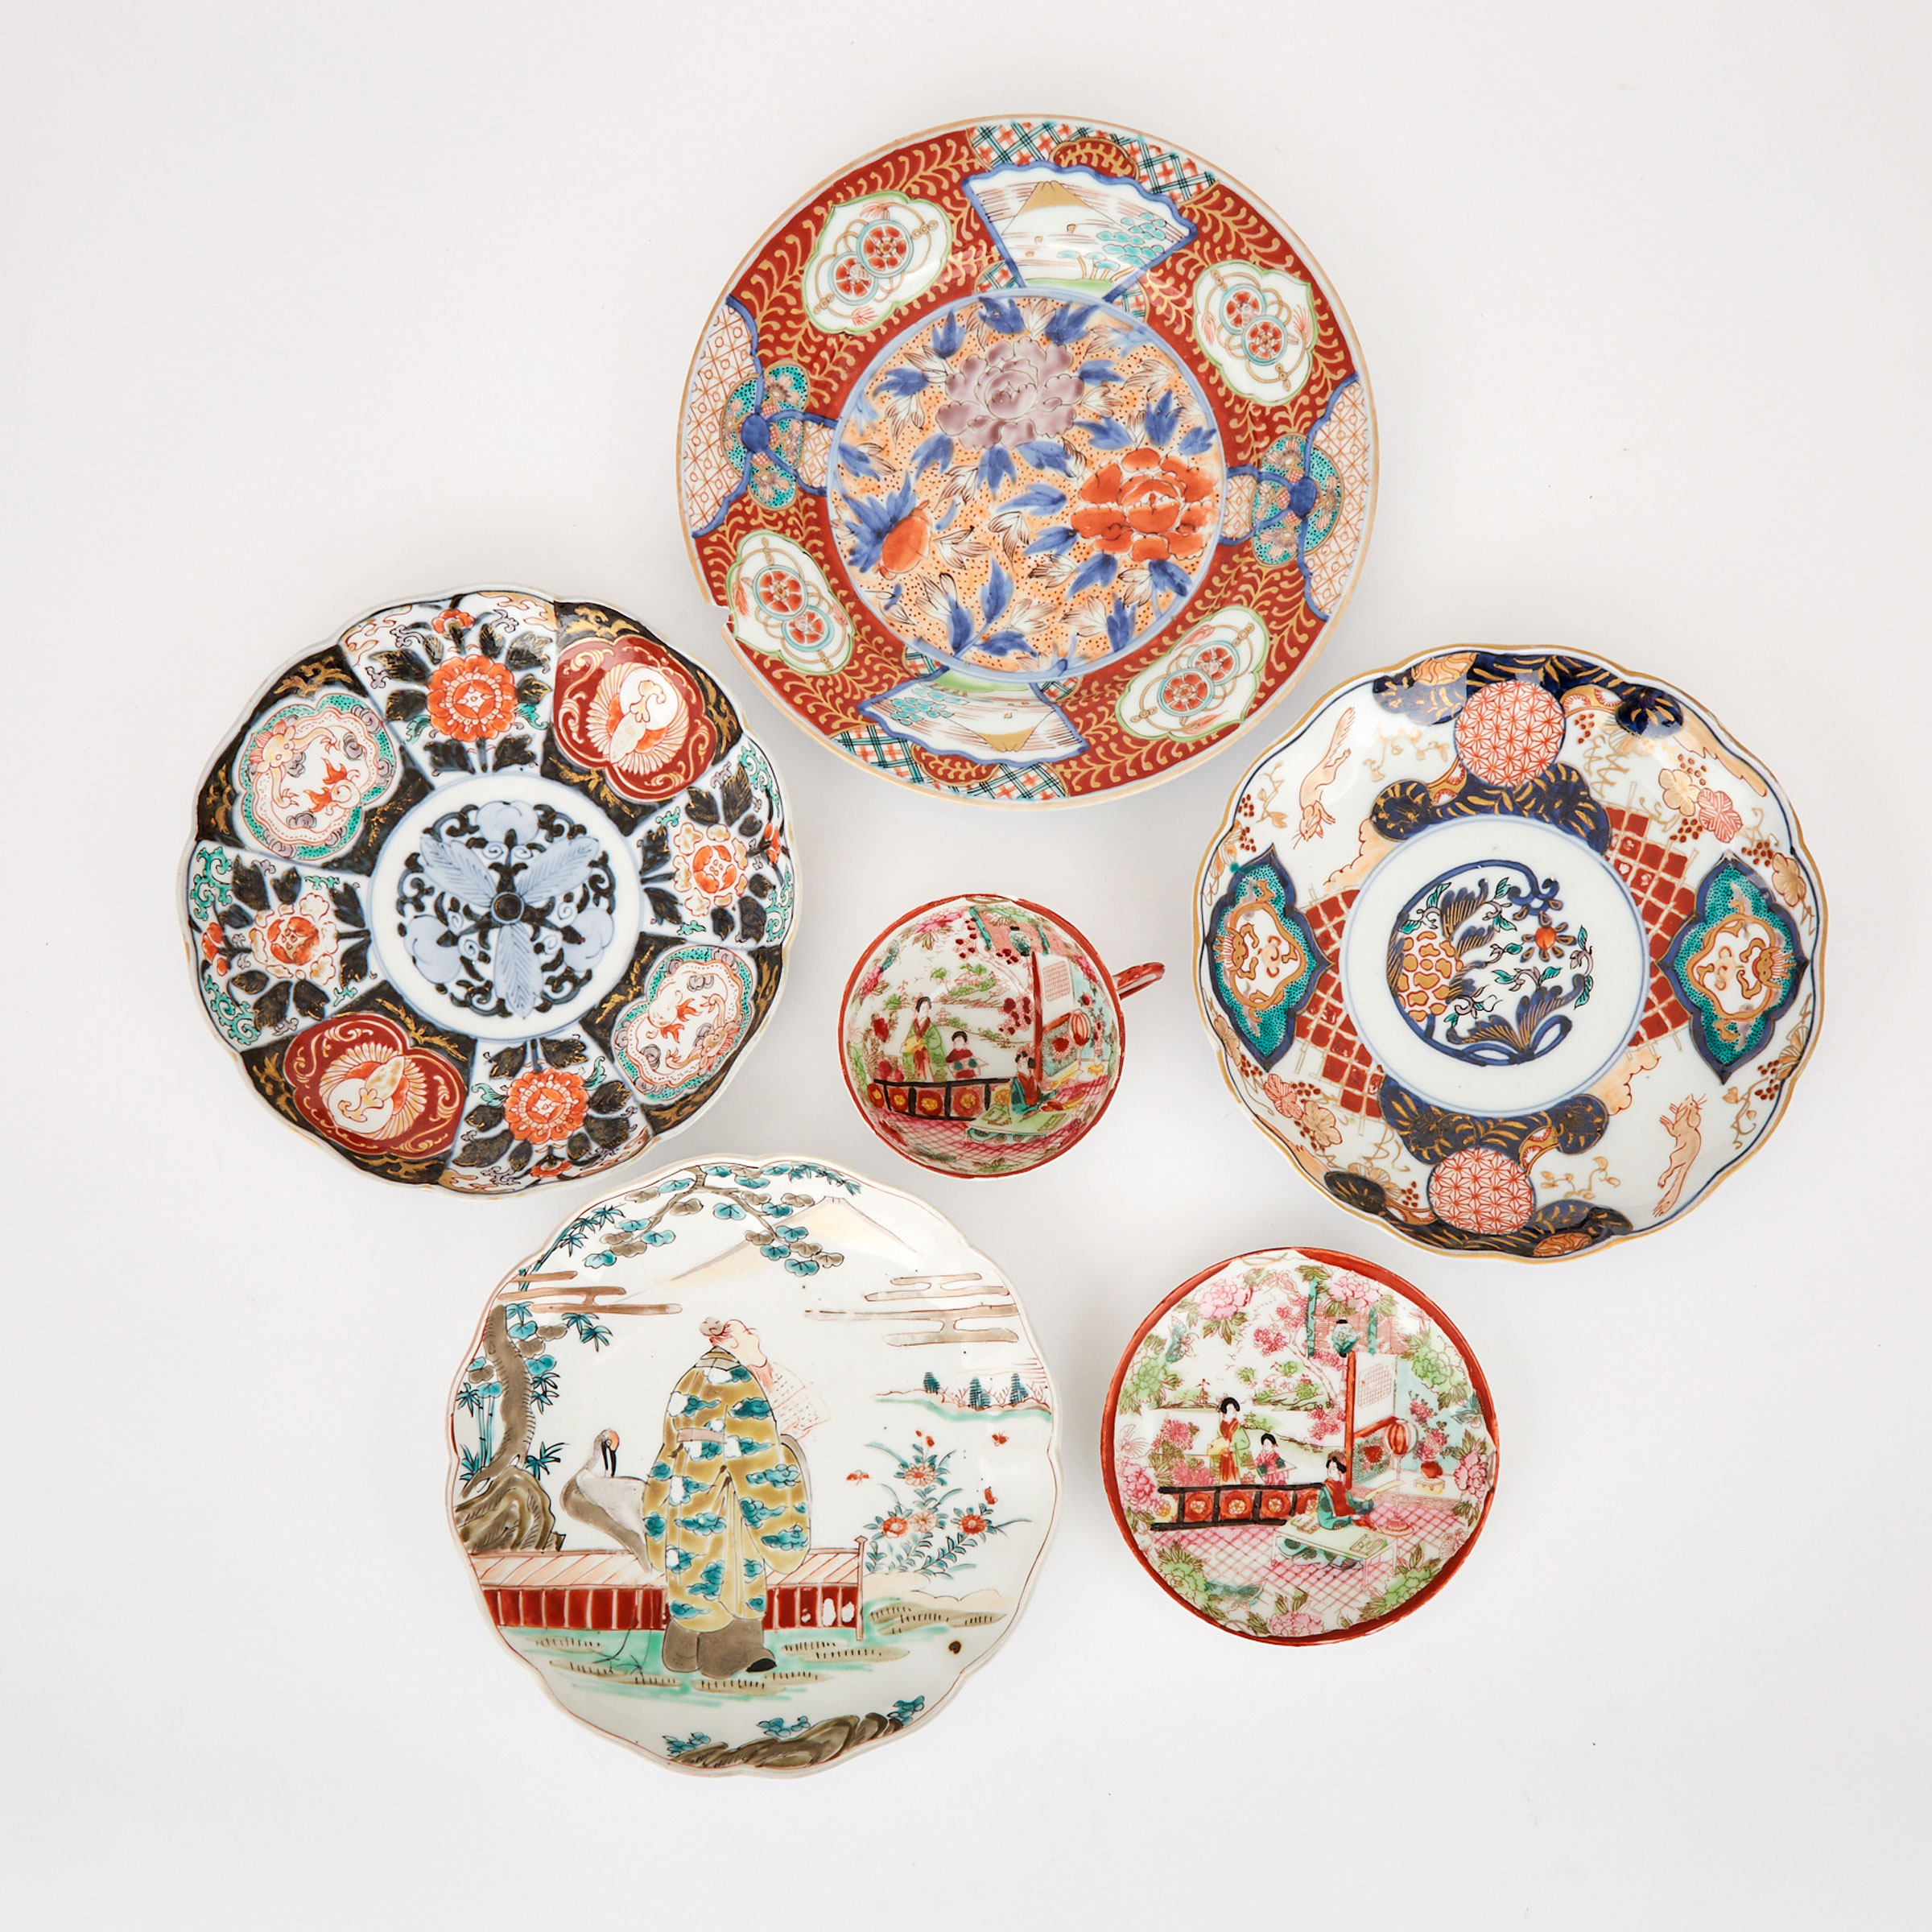 A Group of Six Japanese Porcelain Wares, 18th Century and Later